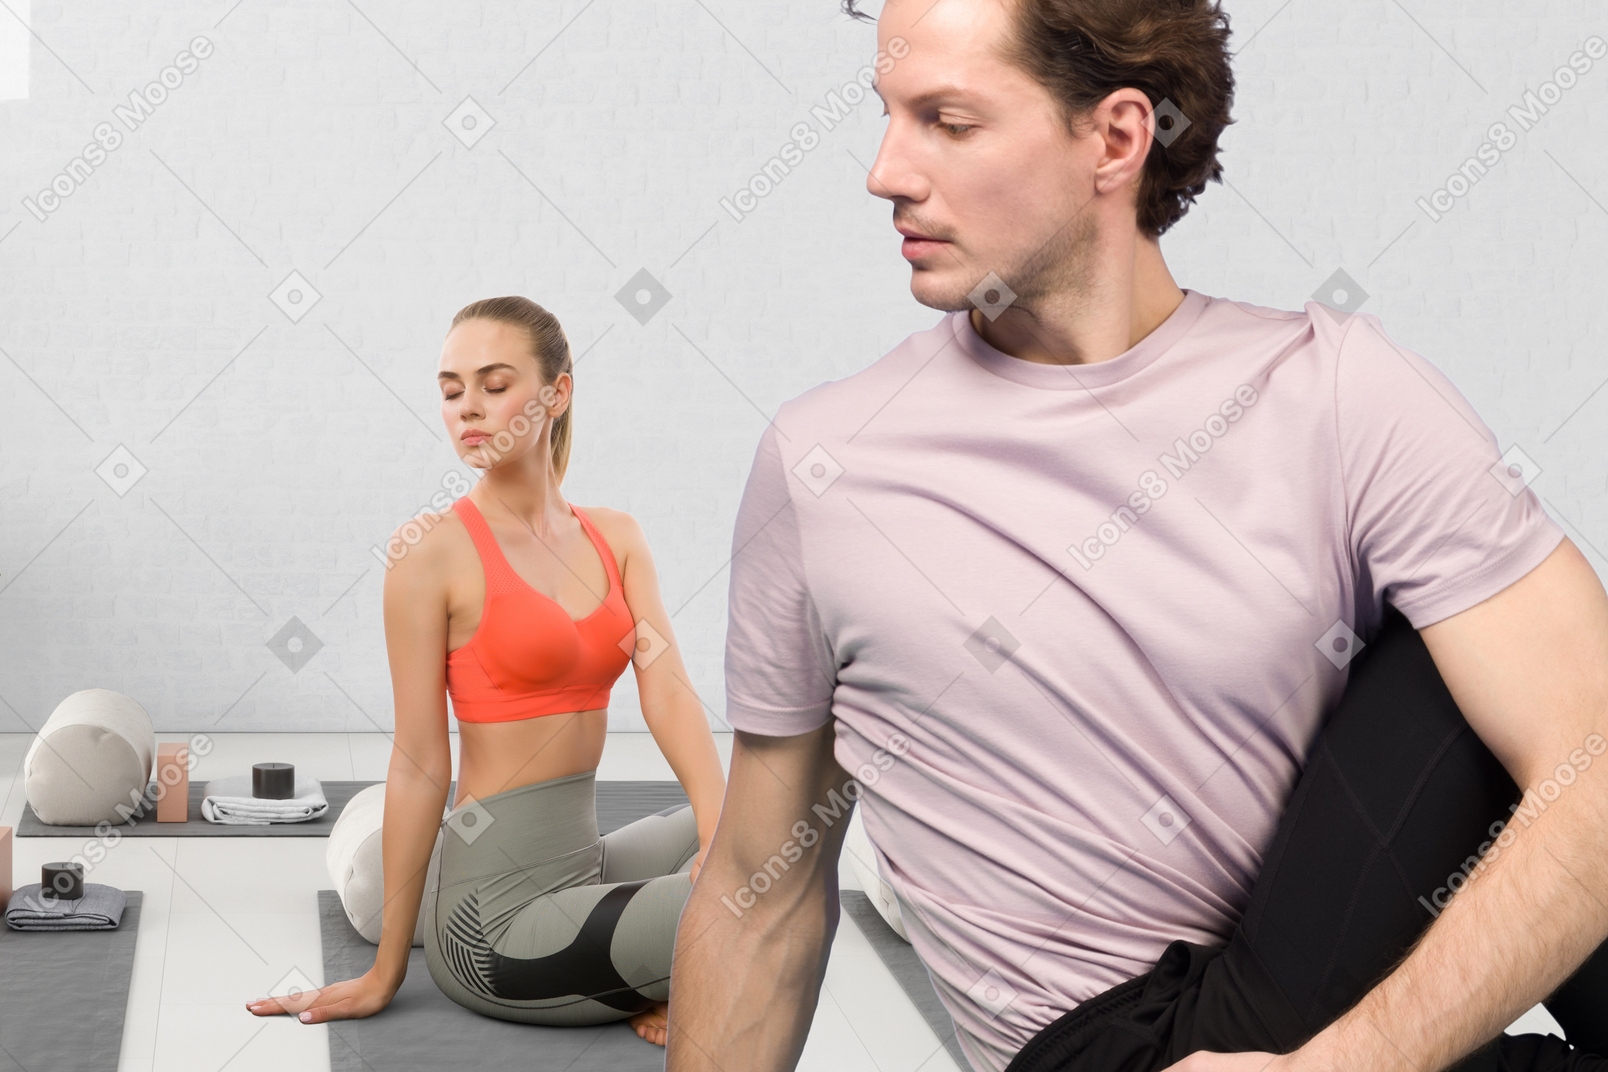 A man and a woman doing yoga in a room